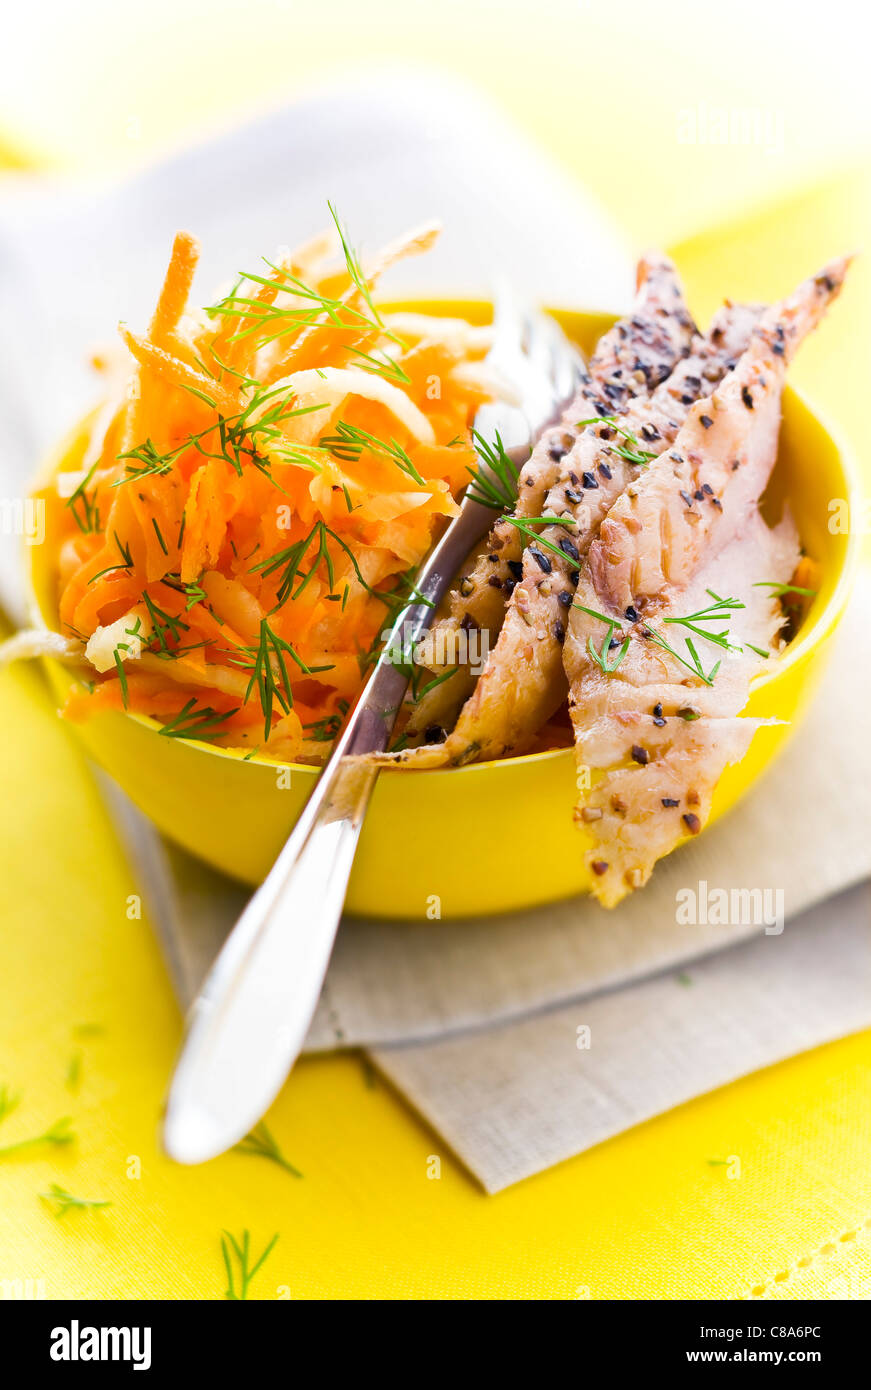 Mackerel fillets with coleslaw Stock Photo